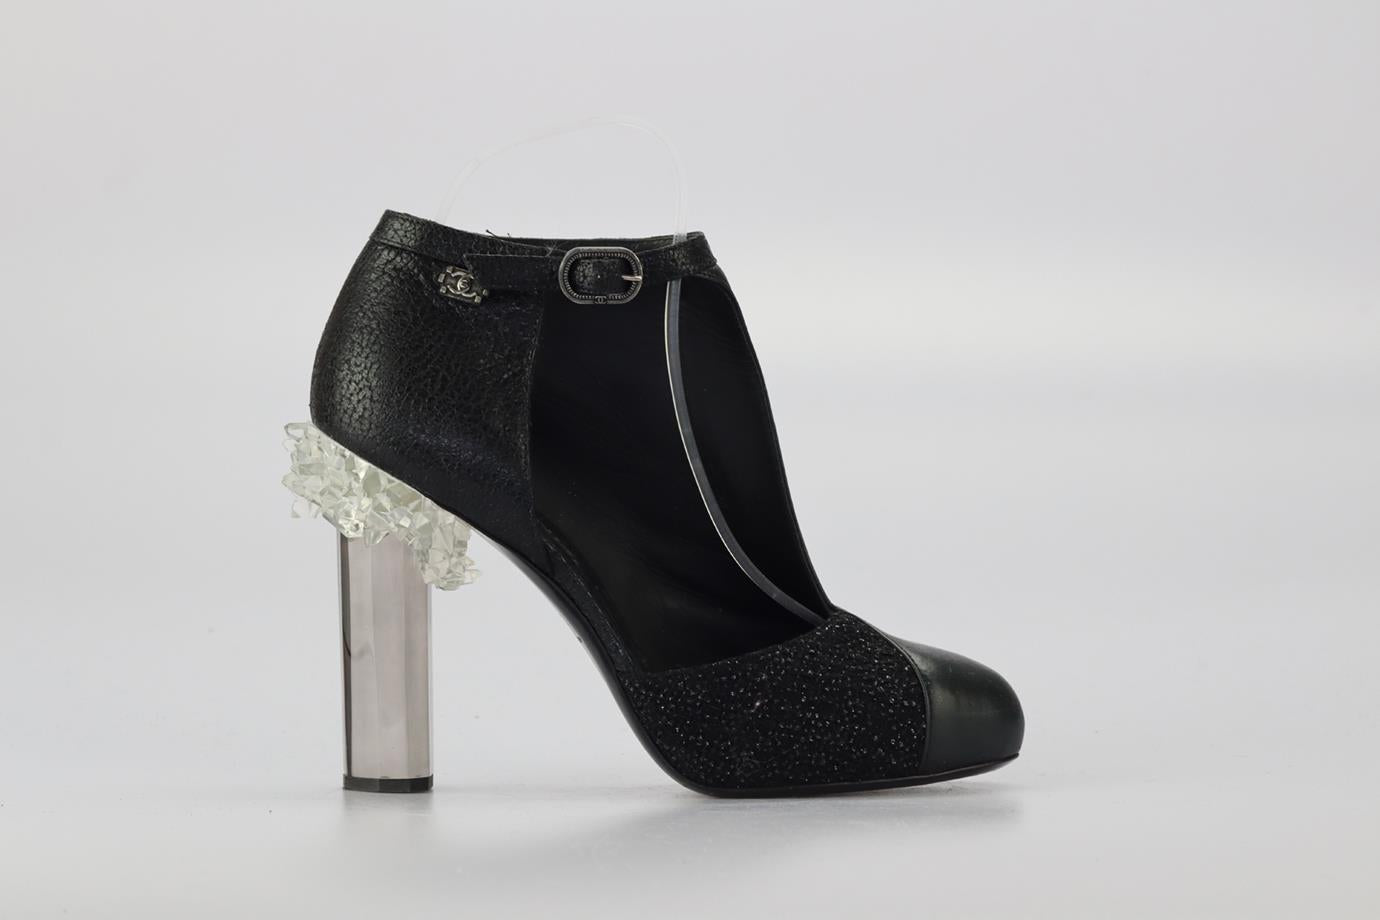 CHANEL 2012 TWEED AND LEATHER ANKLE BOOTS EU 38.5 UK 5.5 US 8.5